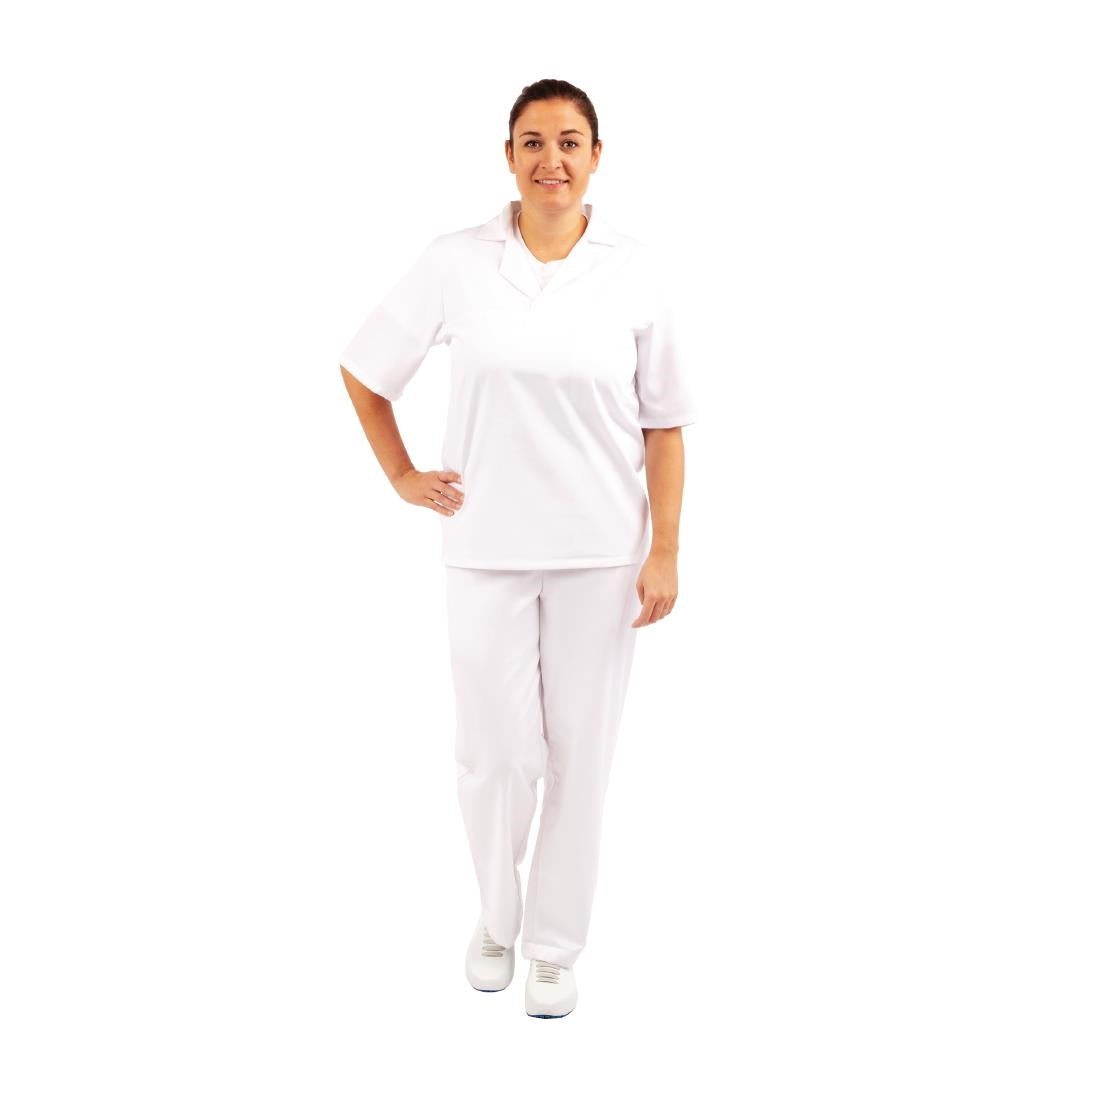 A102-M Unisex Bakers Shirt White M JD Catering Equipment Solutions Ltd